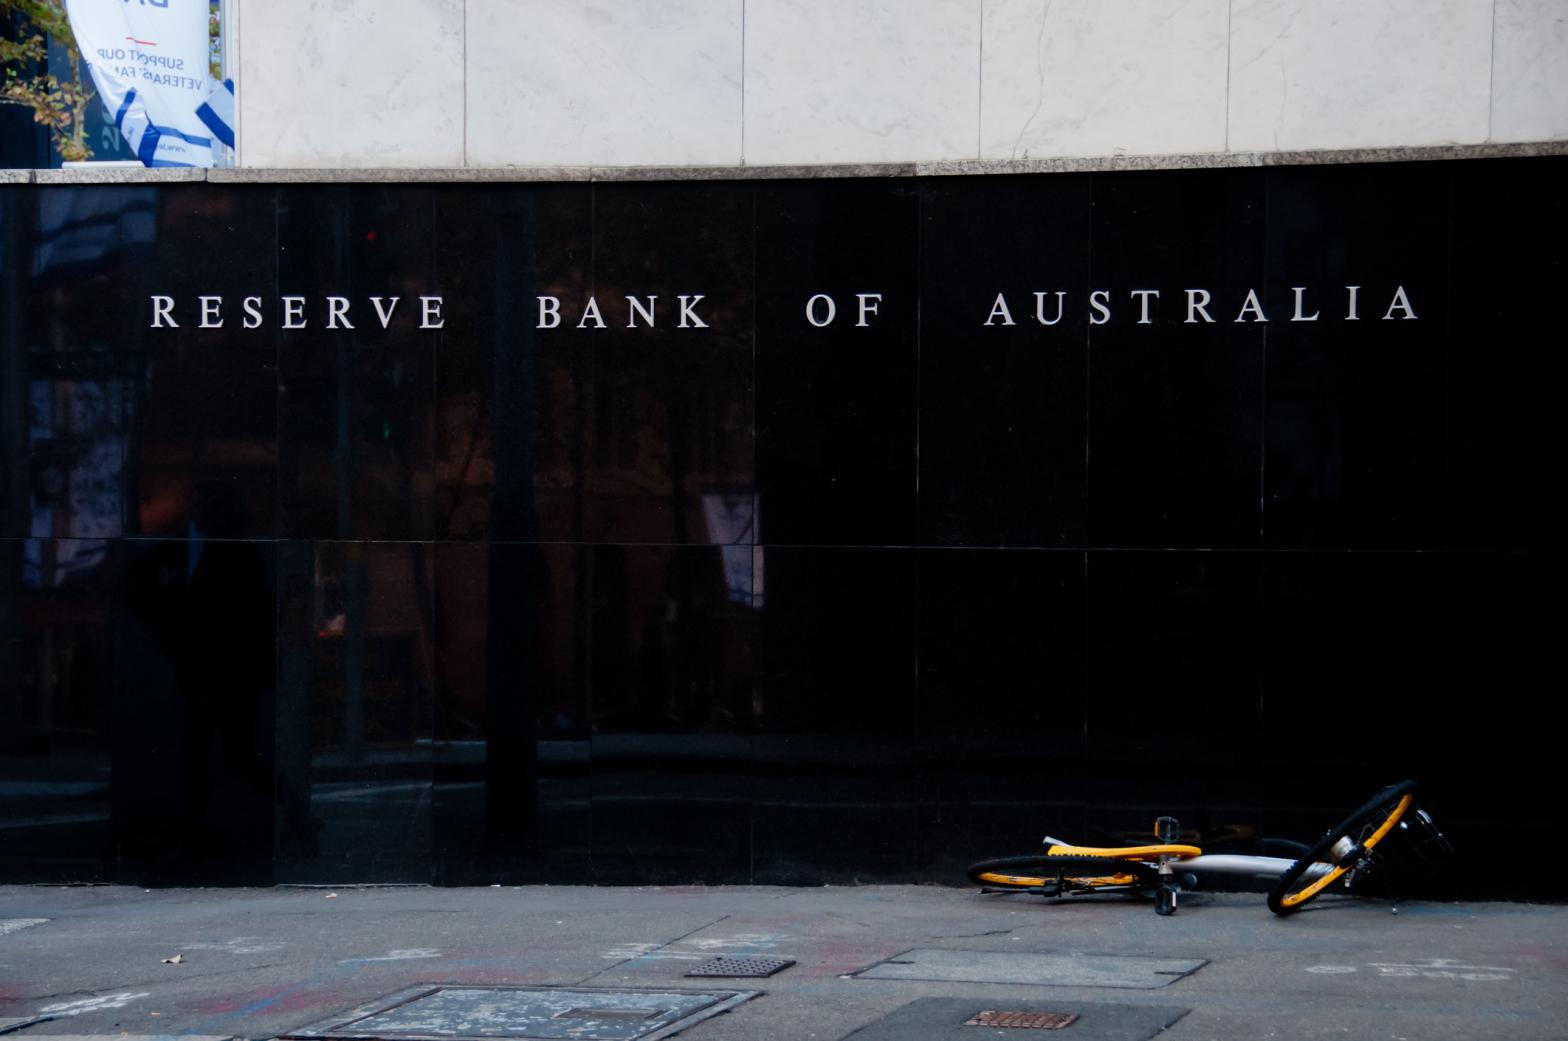 interest rates Reserve Bank of Australia building name on black stone wall in the center of Sydney NSW Australia.